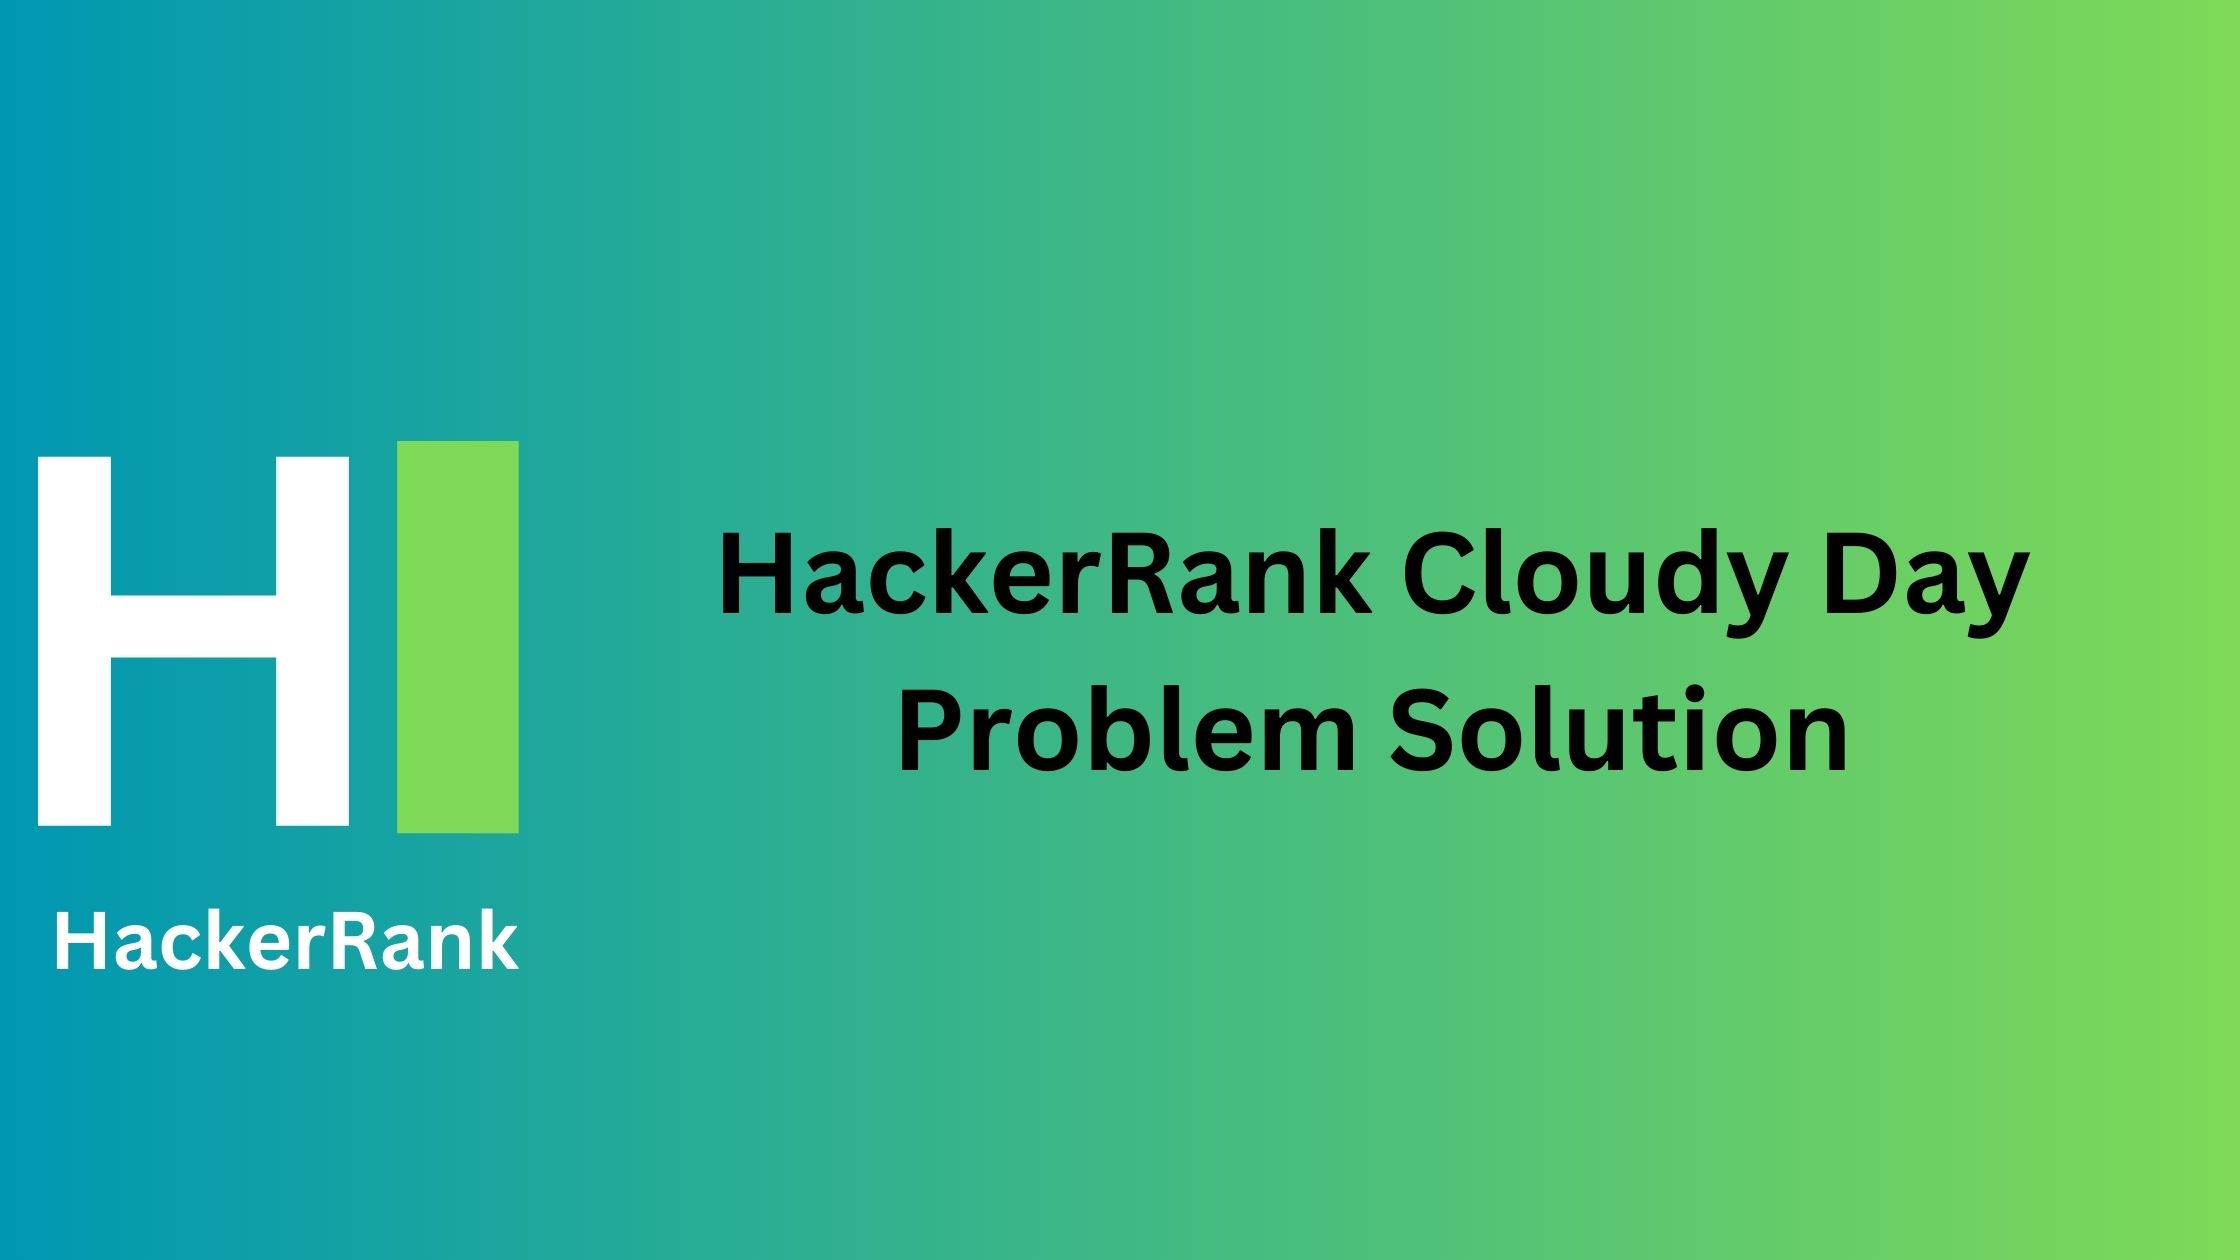 HackerRank Cloudy Day Problem Solution